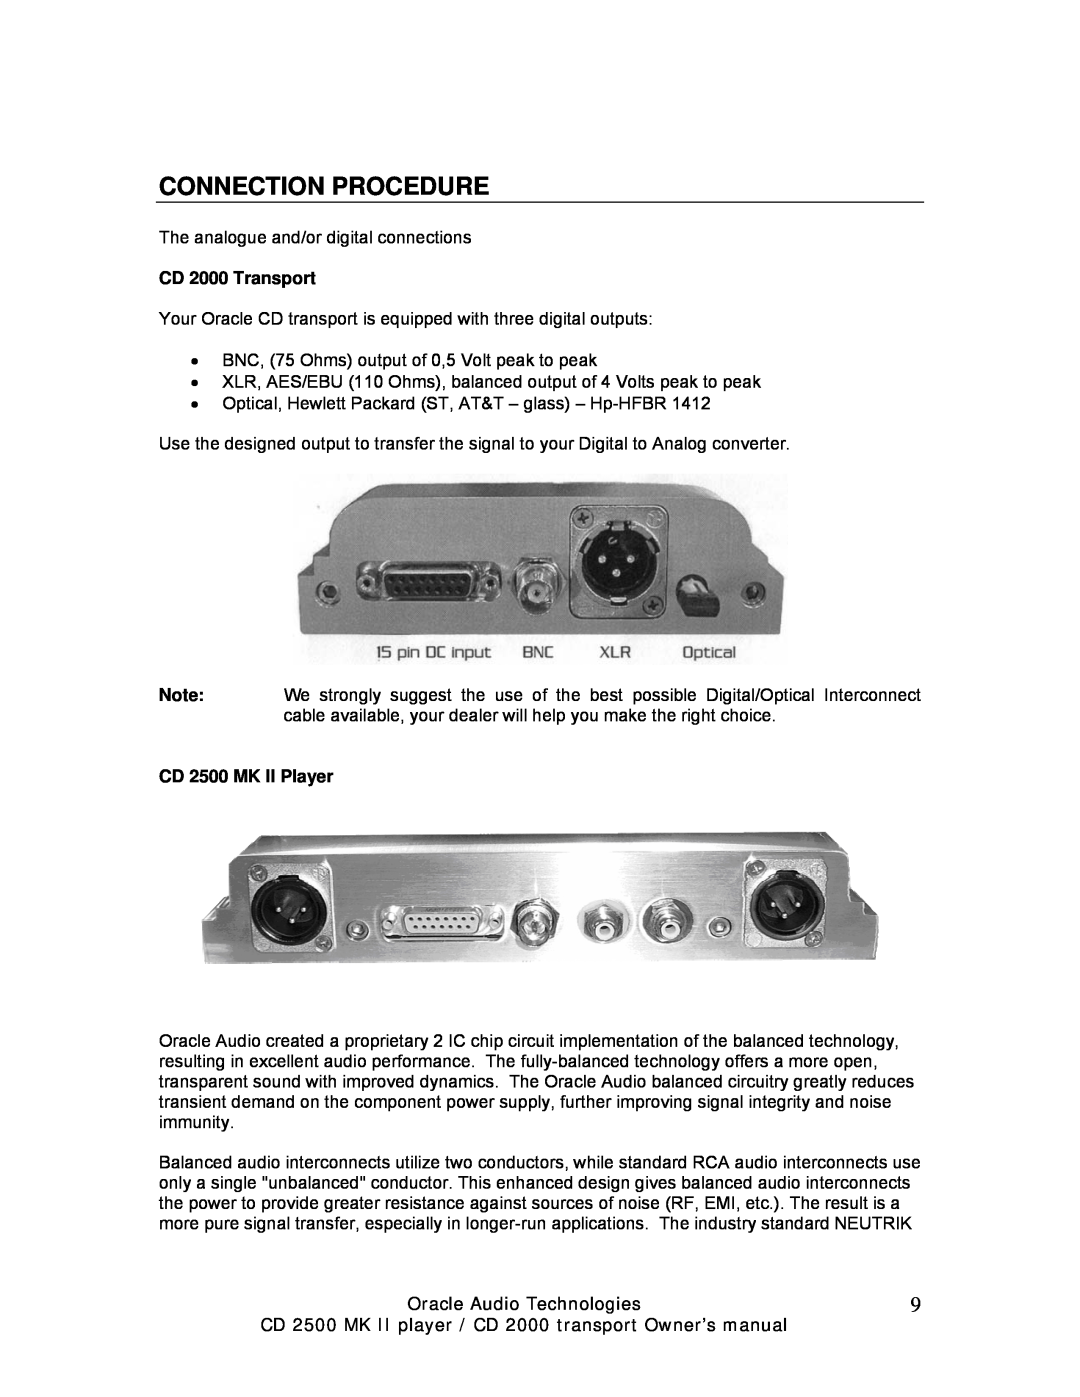 Oracle Audio Technologies manual Connection Procedure, CD 2000 Transport, CD 2500 MK II Player 